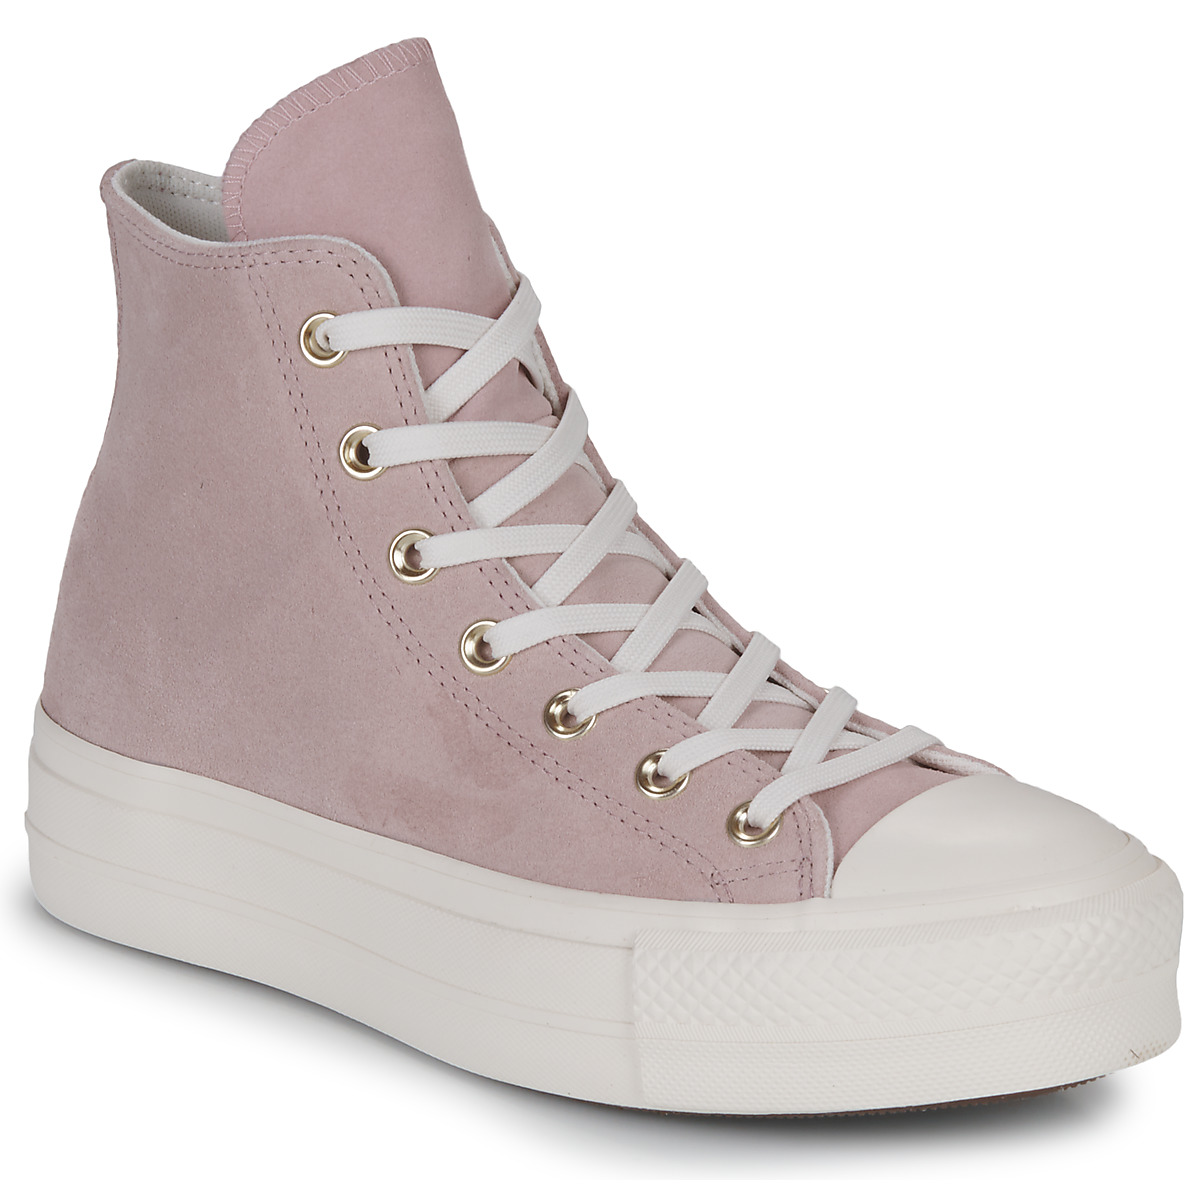 Chaussures Femme Baskets montantes Converse Chuck Taylor All Star Lift Earthy Tones Violet